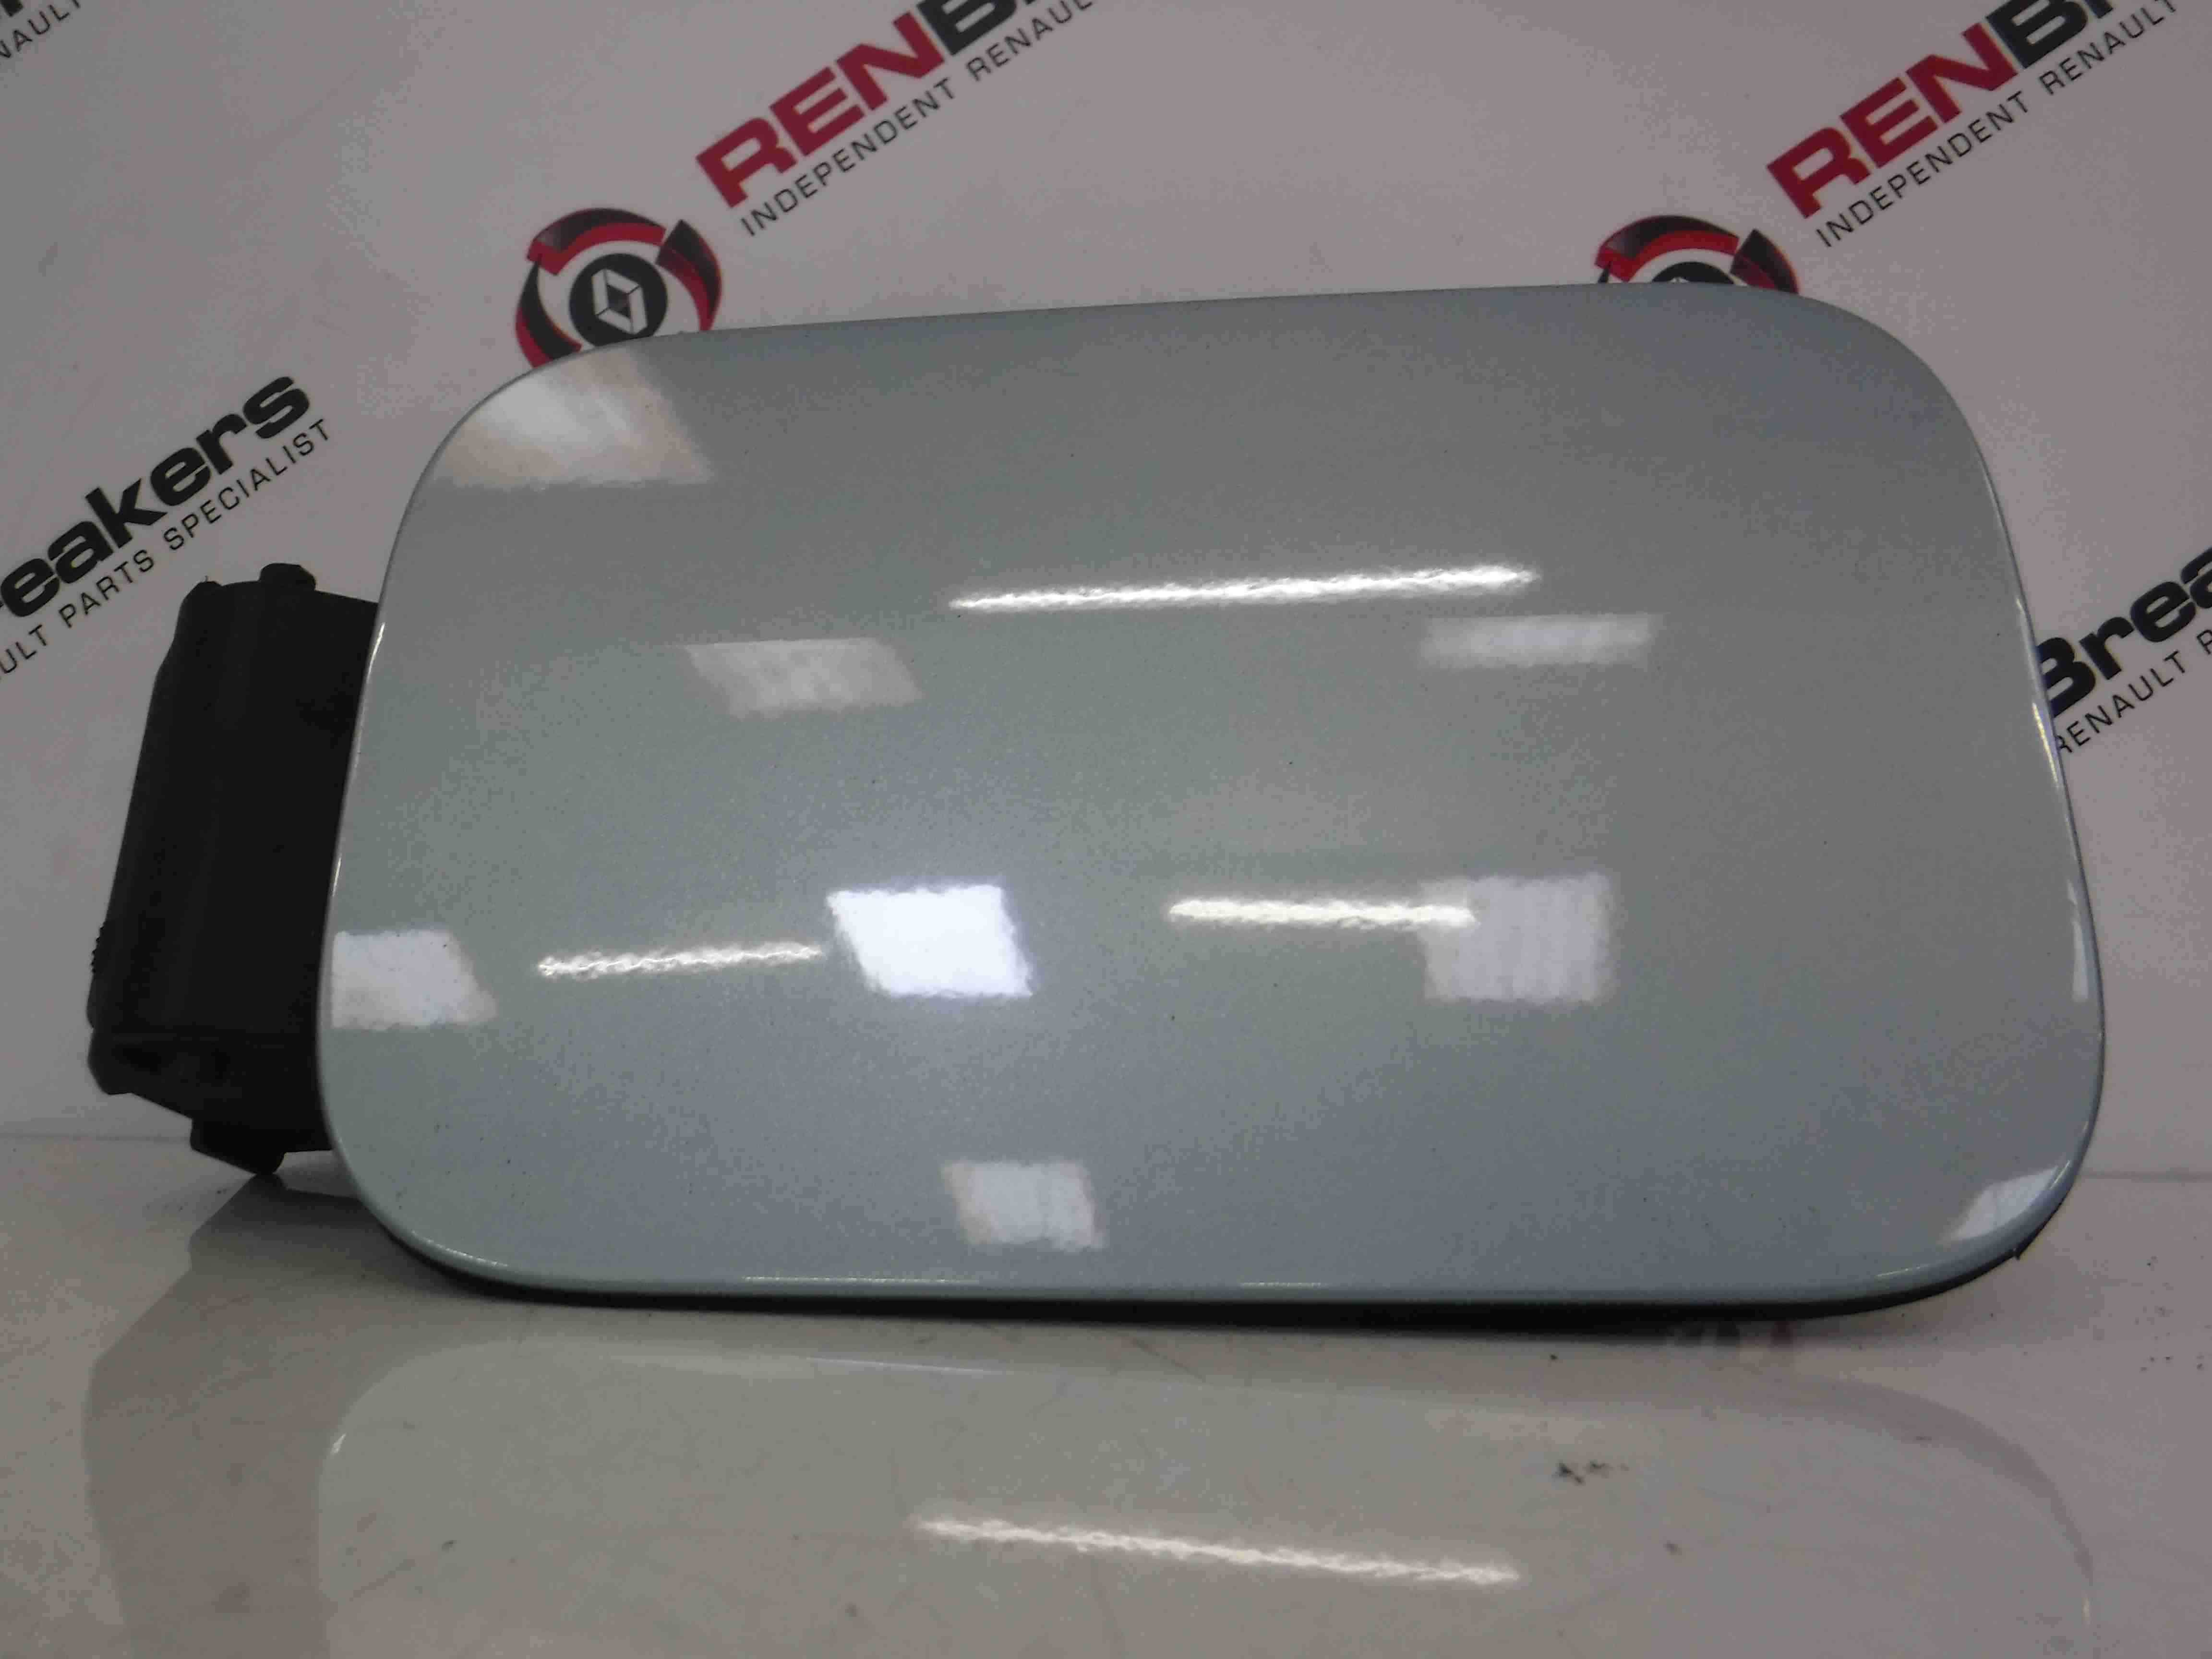 Renault Scenic 2003-2009 Fuel Flap Cover Blue TERNK + Backing 8200228509